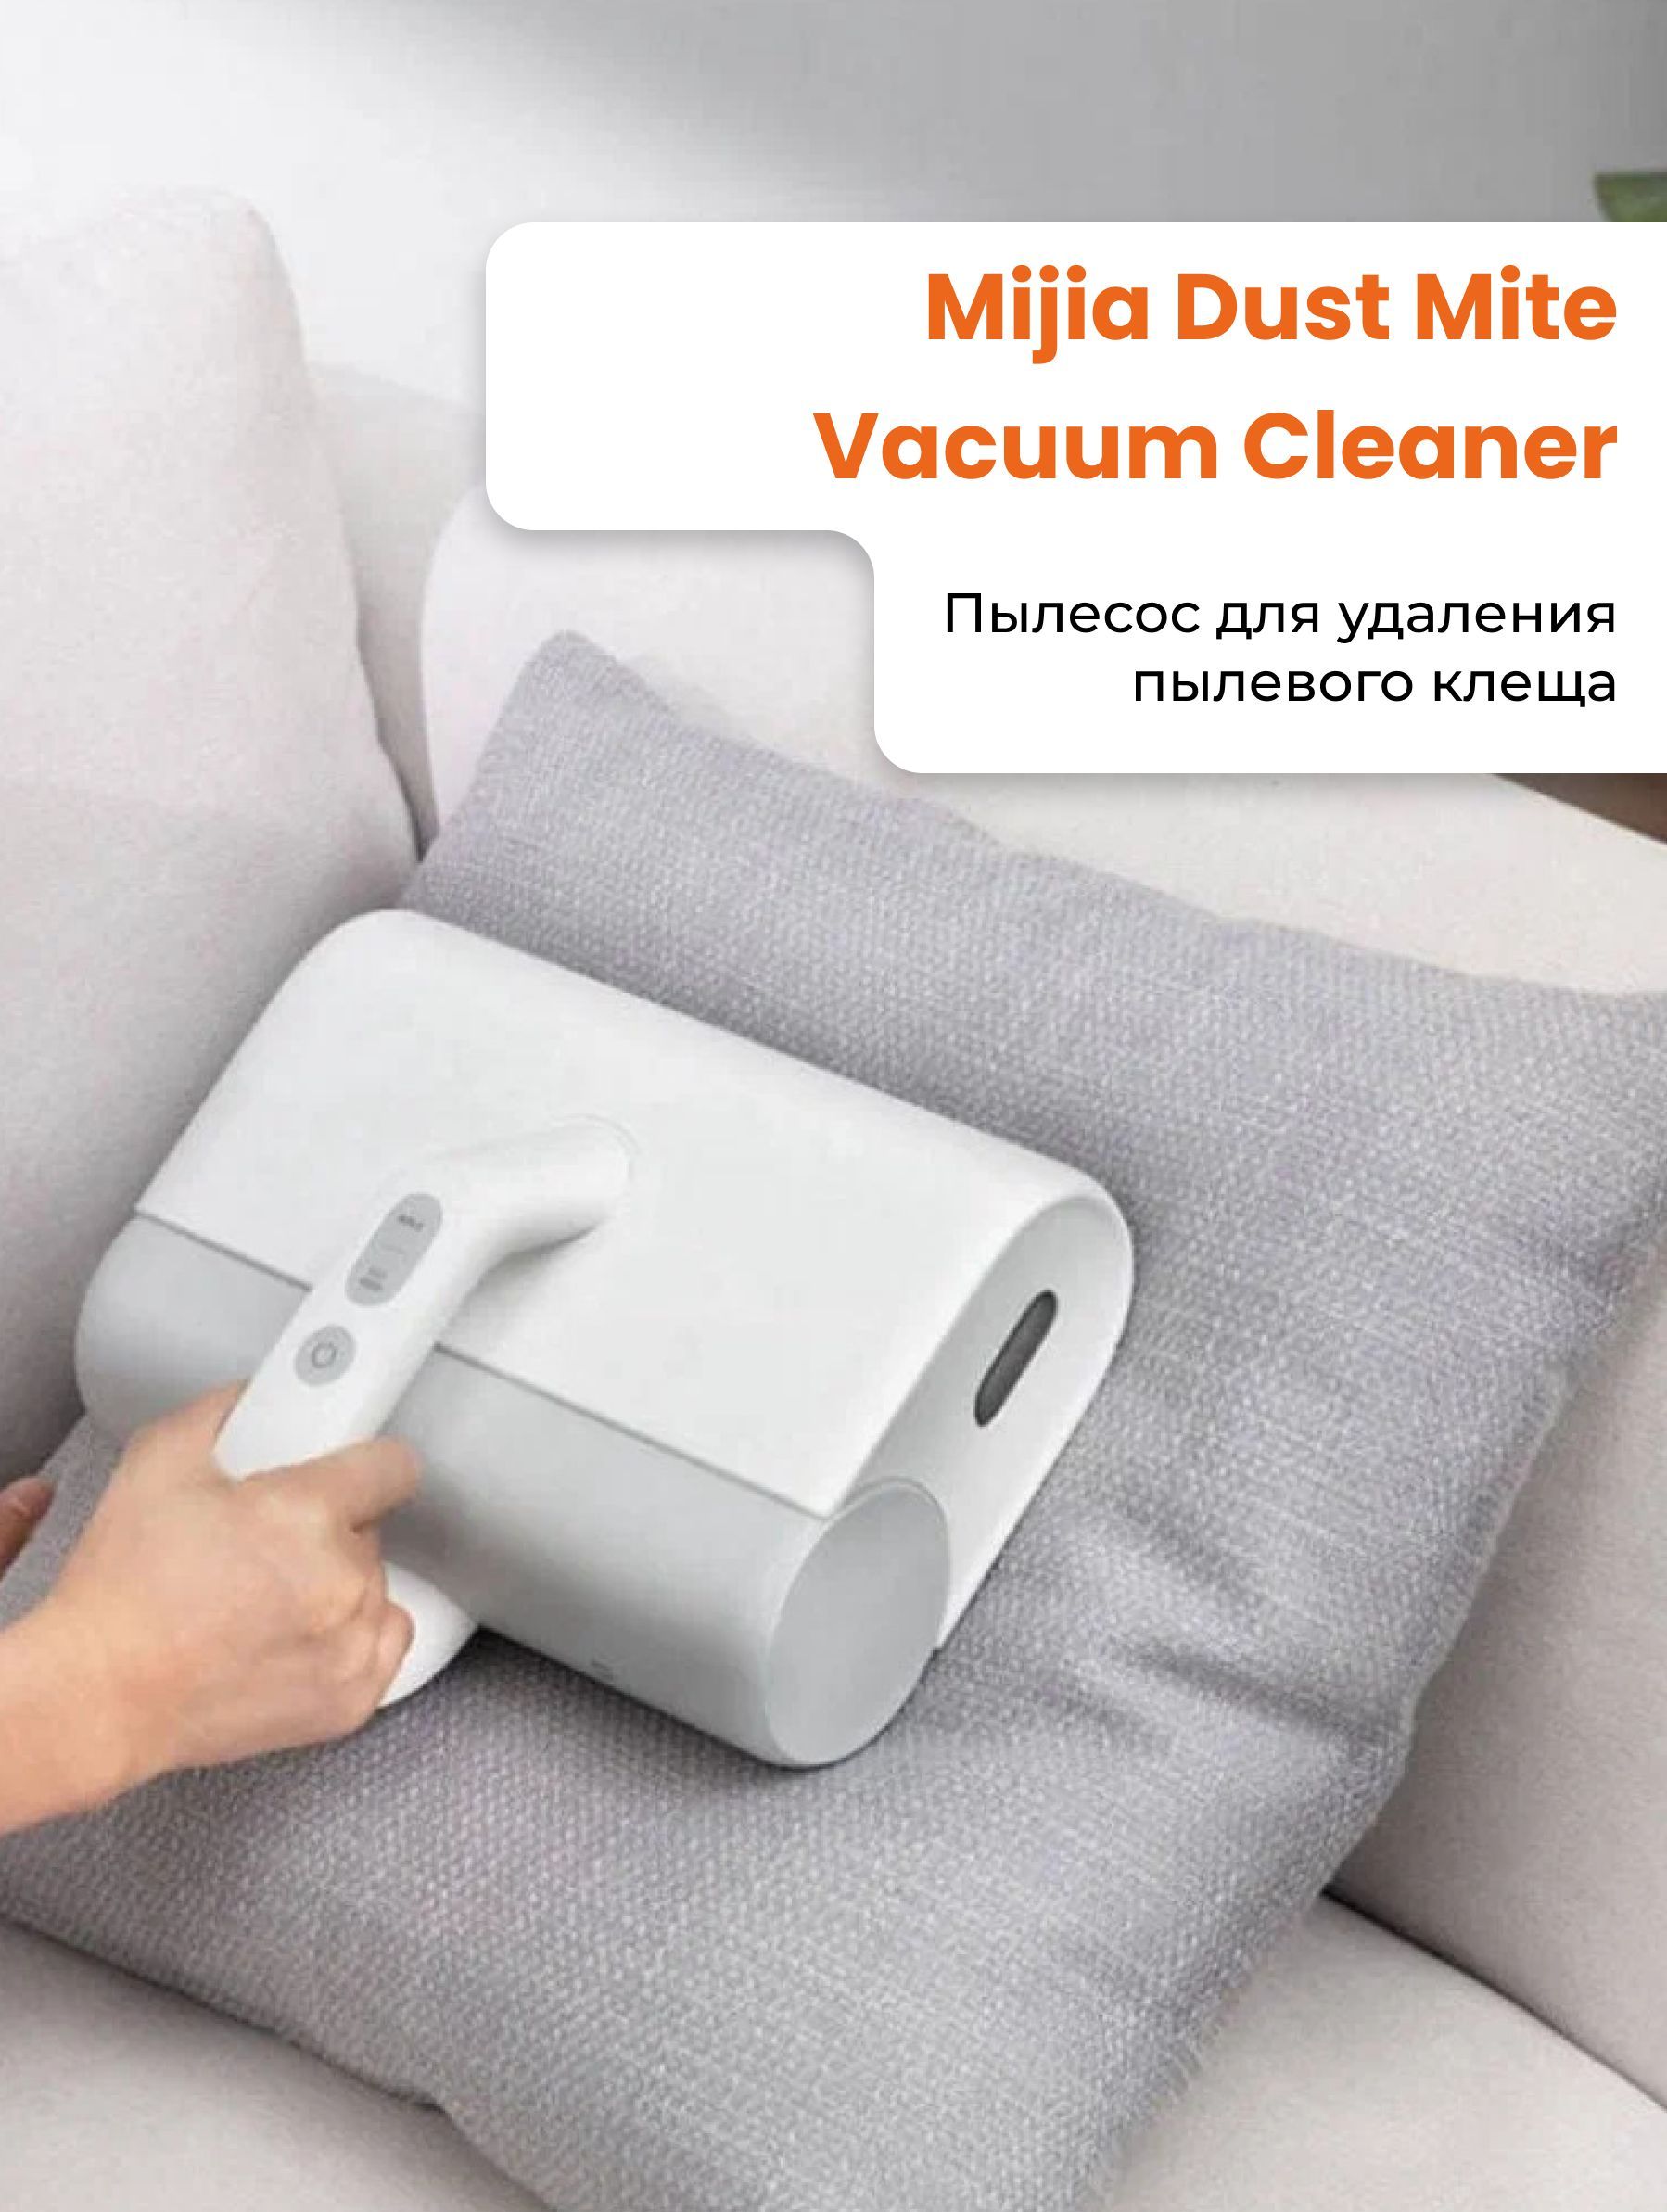 Mijia dust mite vacuum cleaner mjcmy01dy. Xiaomi mjcmy01dy. Пылесос Xiaomi (mjcmy01dy). Xiaomi Dust Mite Vacuum. Xiaomi Mijia Dust Mite Vacuum Cleaner.